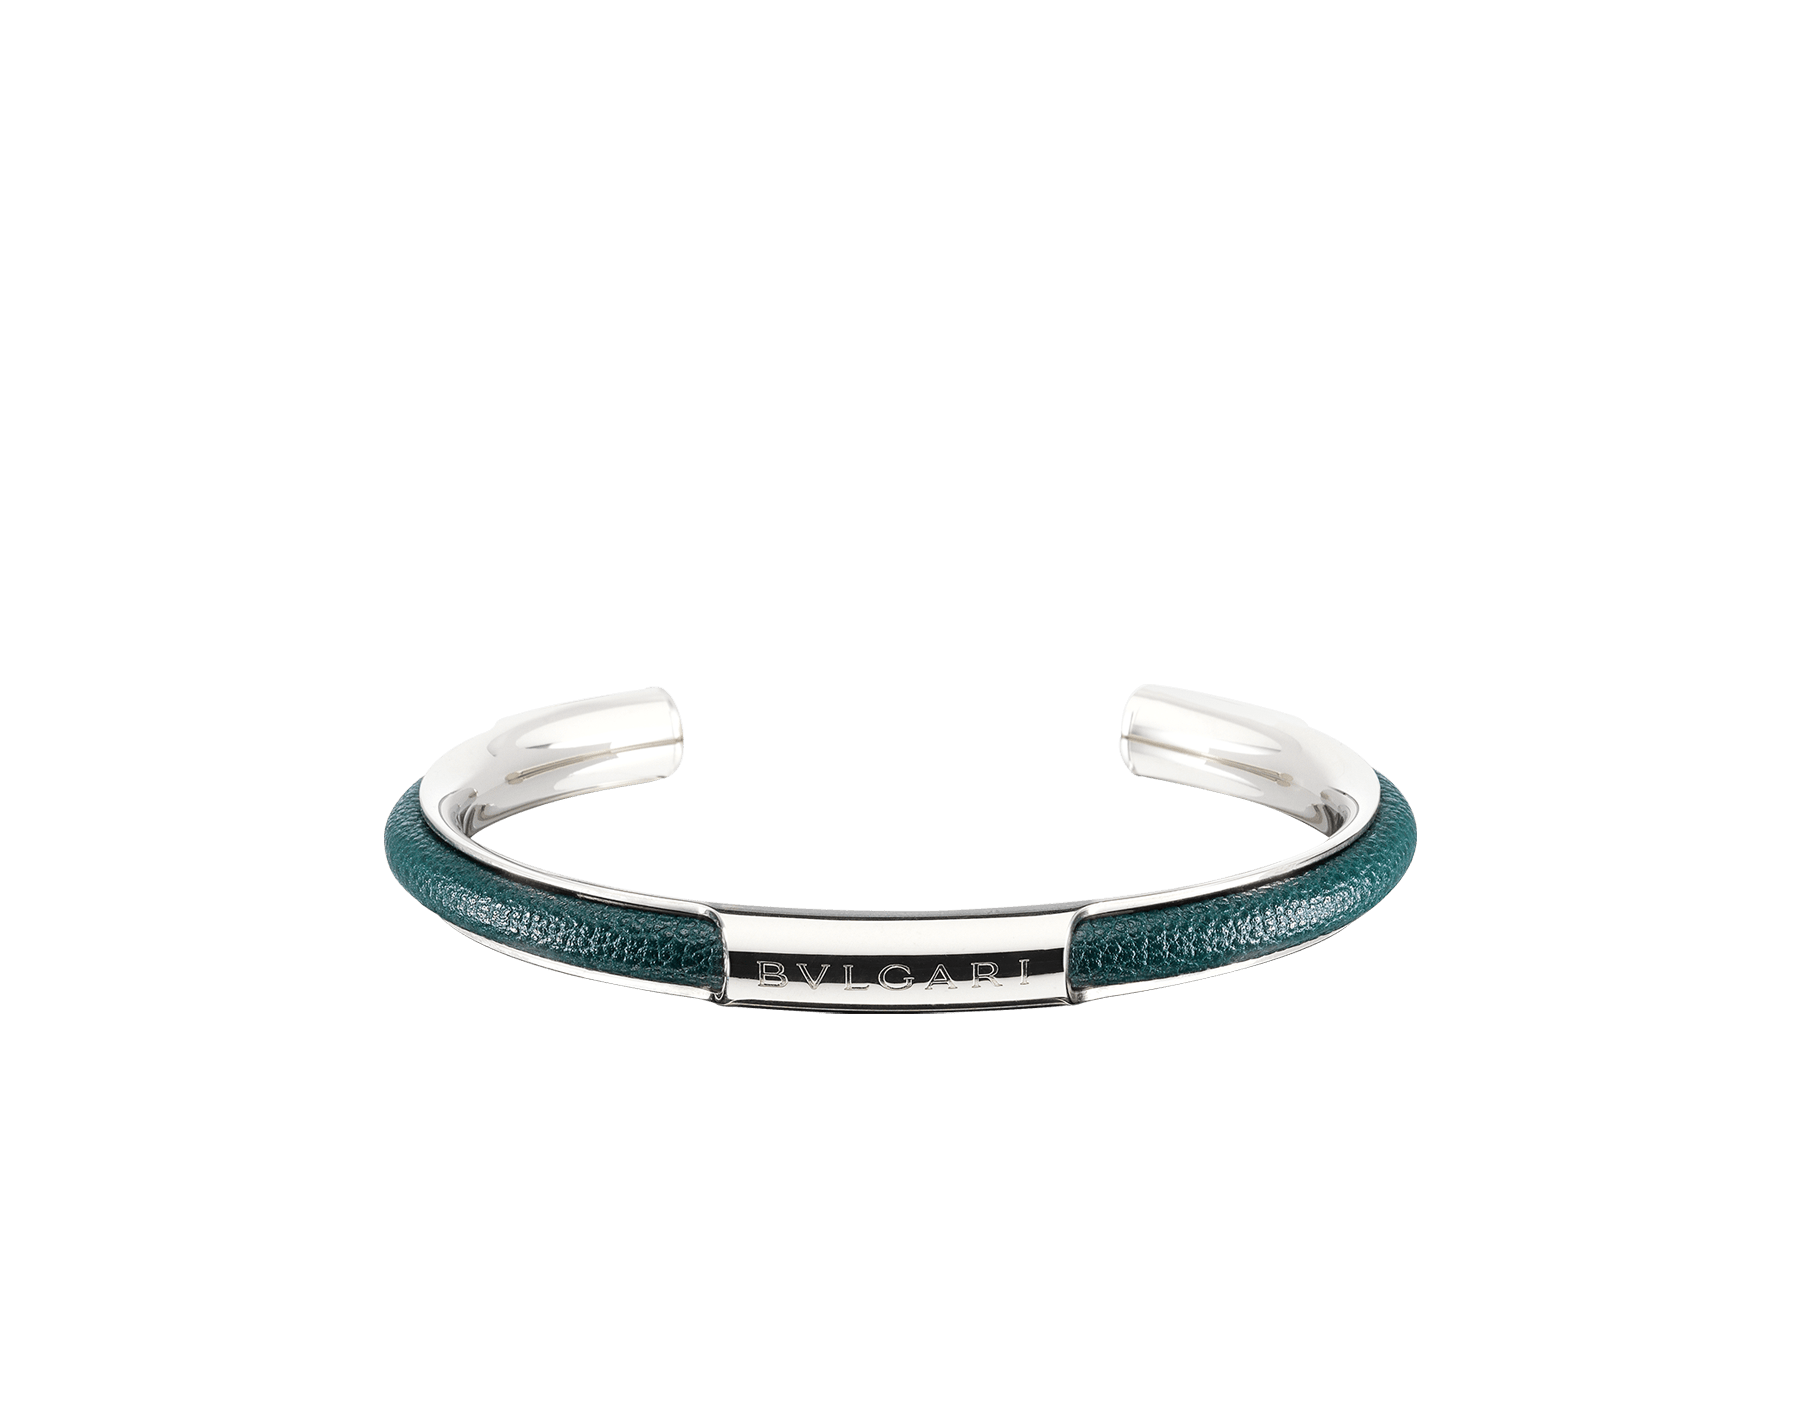 "BVLGARI BVLGARI" men's bangle bracelet in palladium plated brass with Forest Emerald green "Urban" grainy calf leather inserts. "BVLGARI" engraving in the middle. BBM-LOGOCONTR-UCL-FE image 1